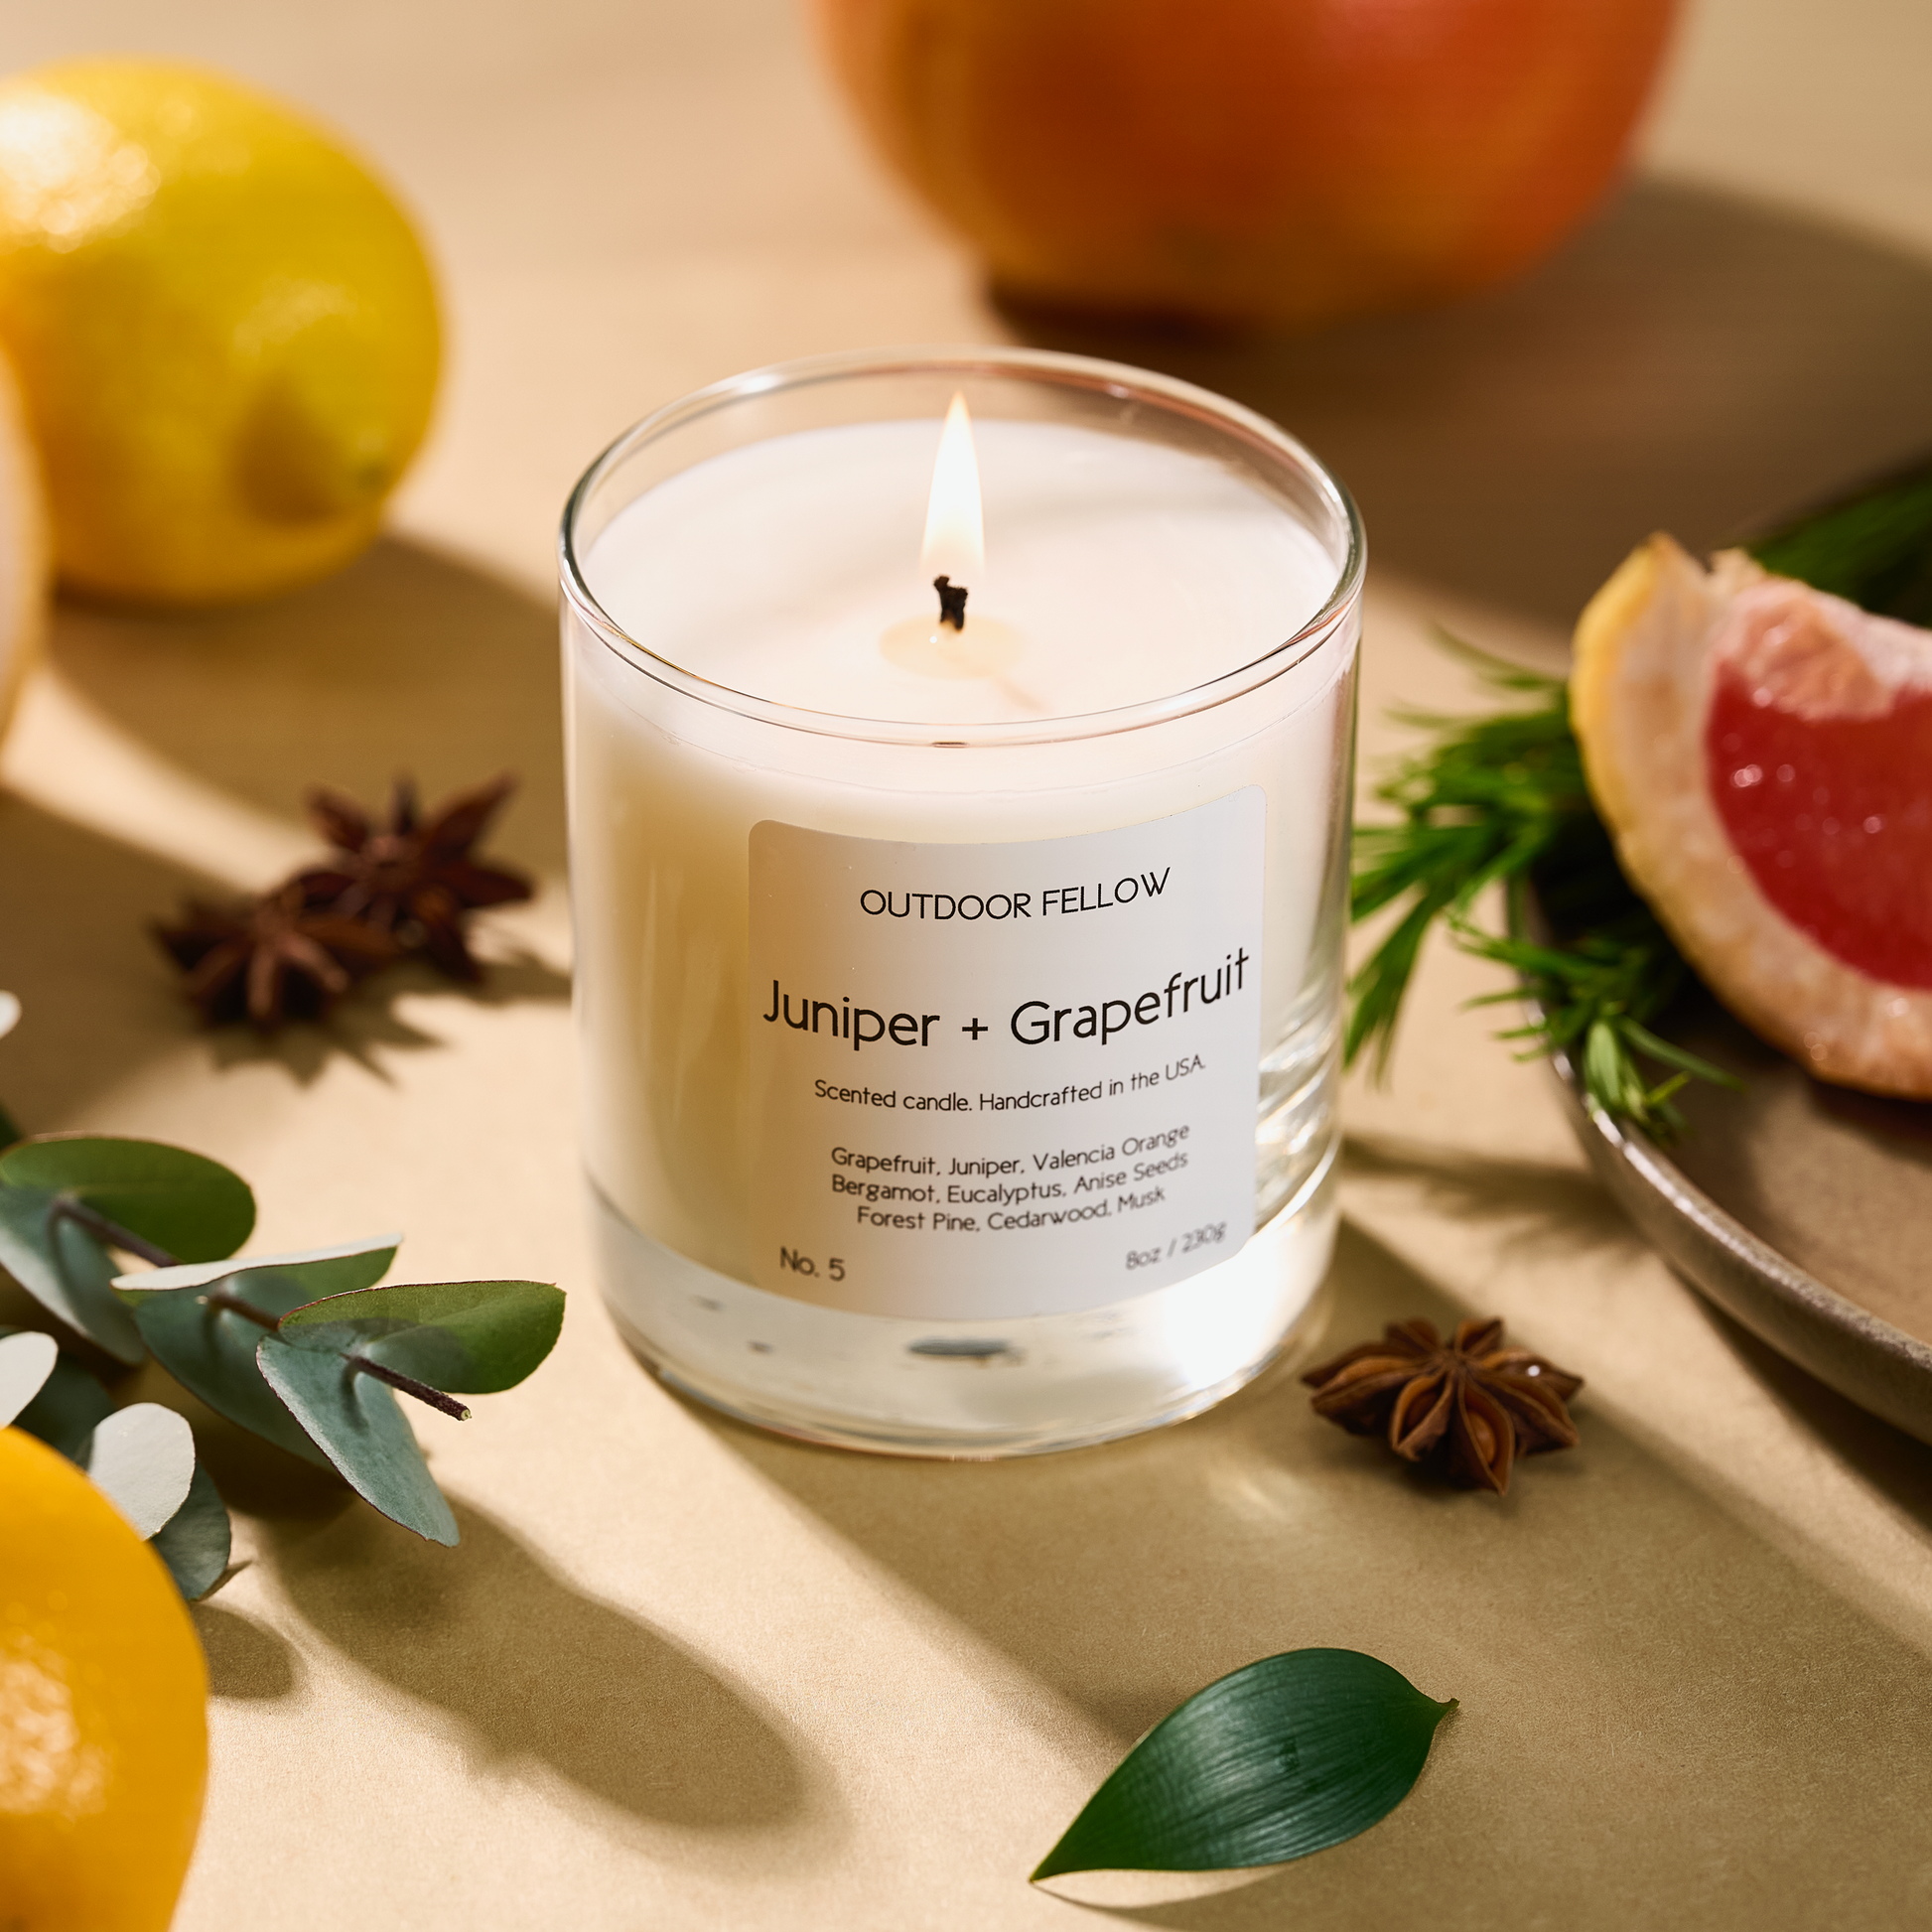 Juniper and Grapefruit scented candle next to cut grapefruit, eucalyptus and star anise